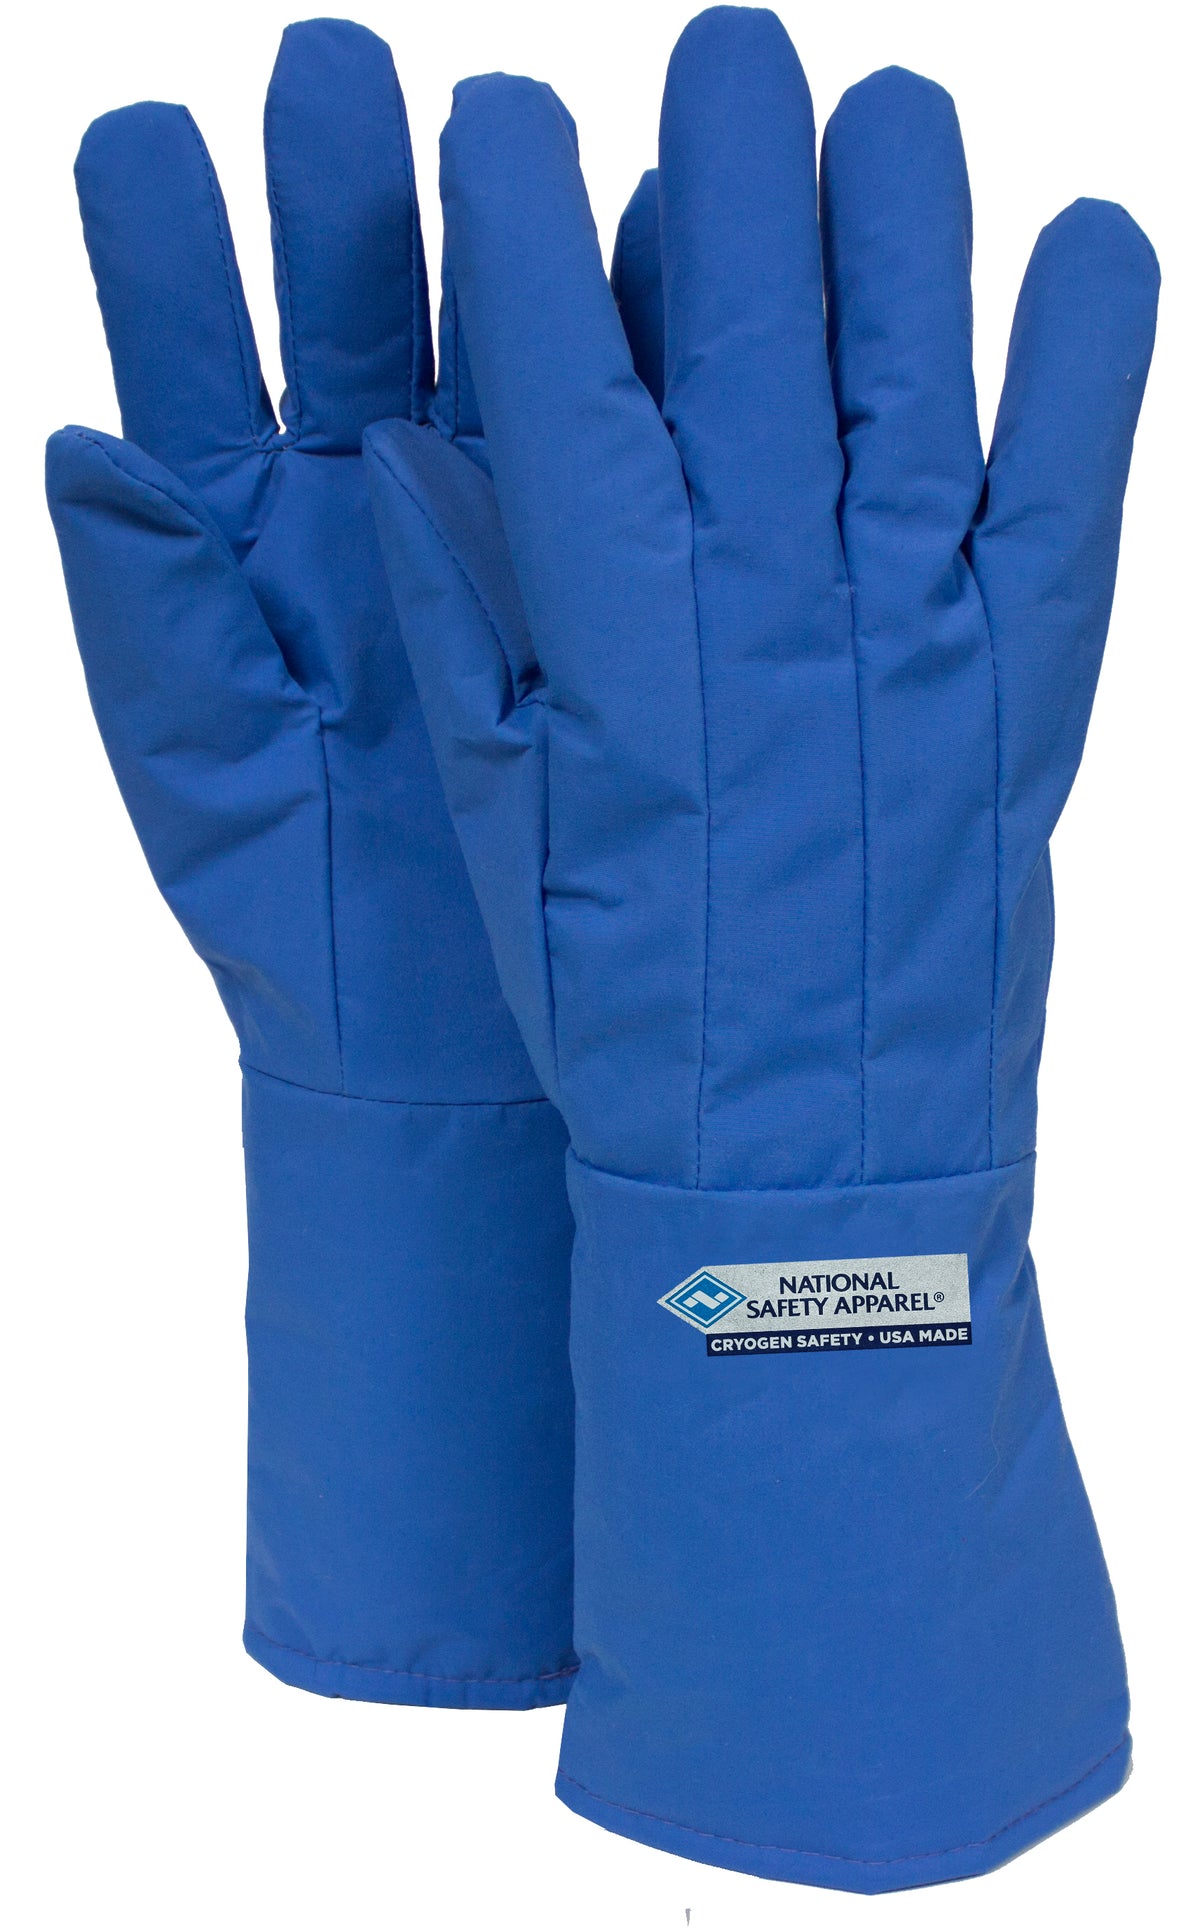 Water Resistant Mid-Arm Length Cryogenic Gloves